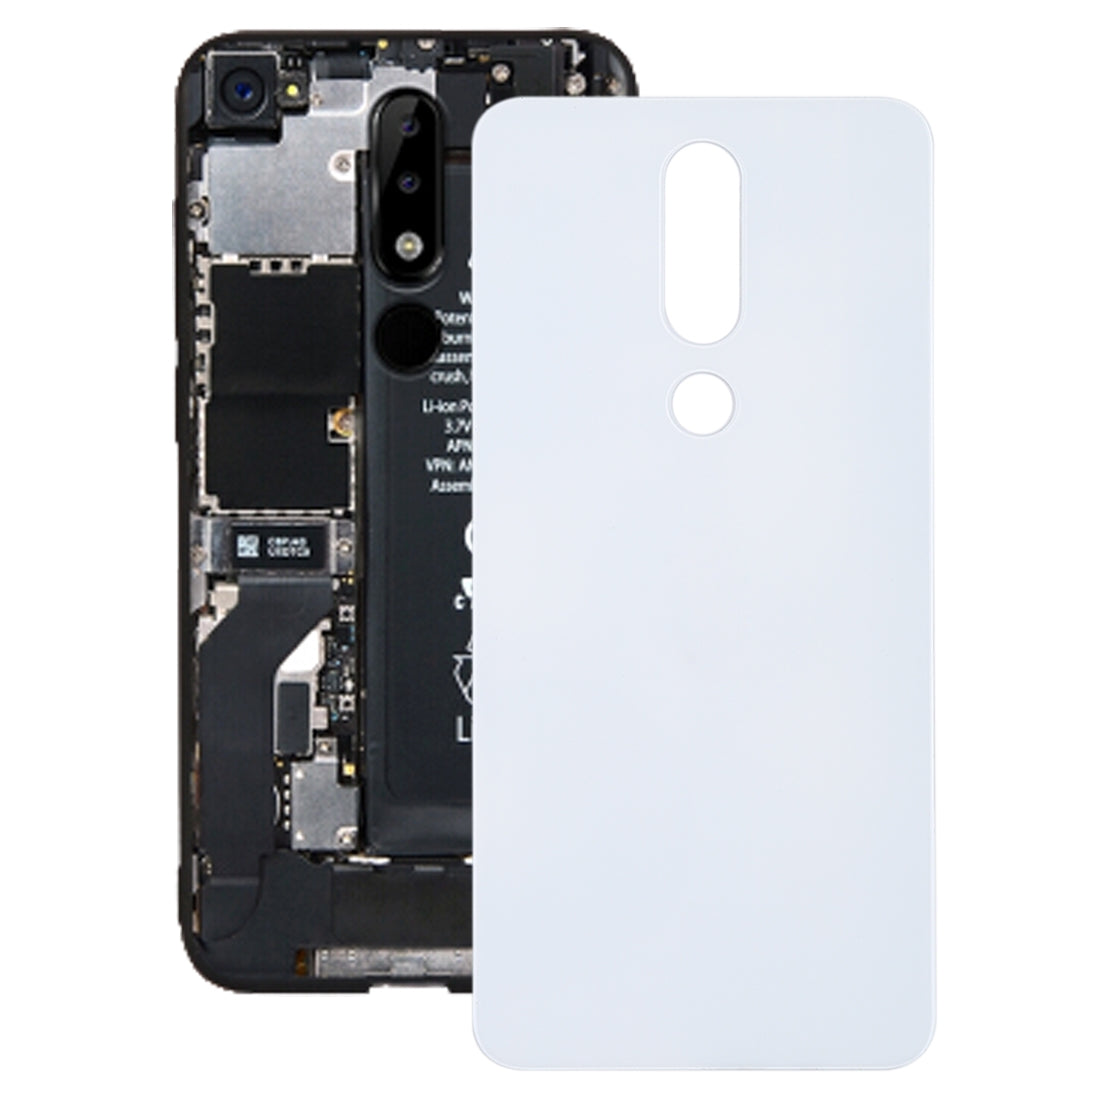 Battery Cover Back Cover Nokia 5.1 Plus X5 White